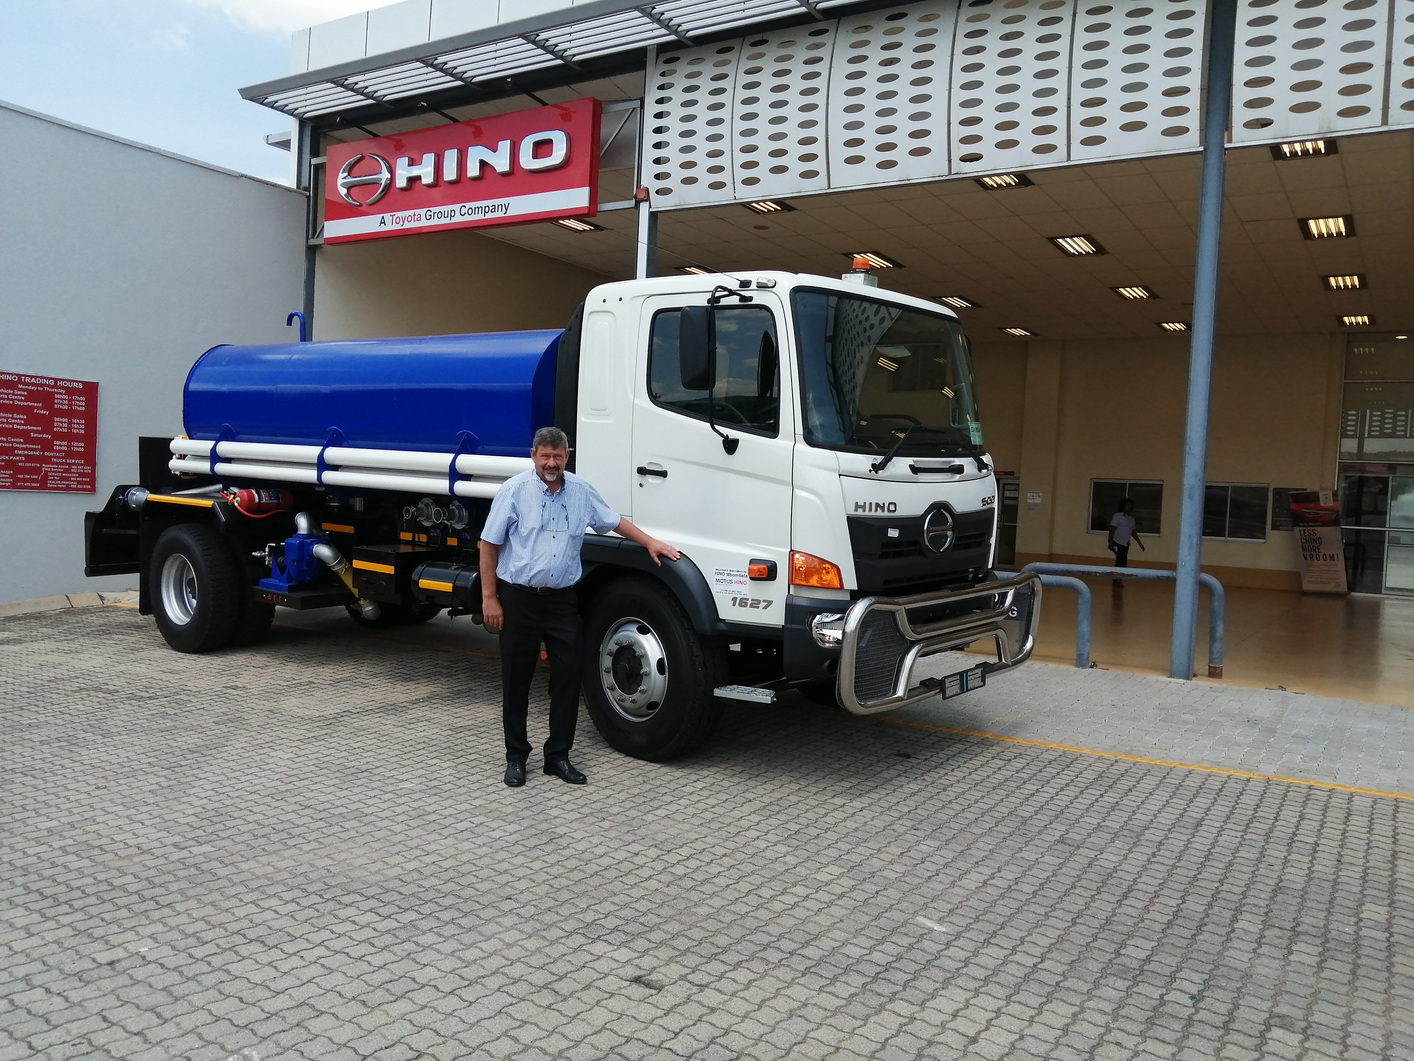 Toy Nelsp4 Danie Hefer at the Hino division of the dealership